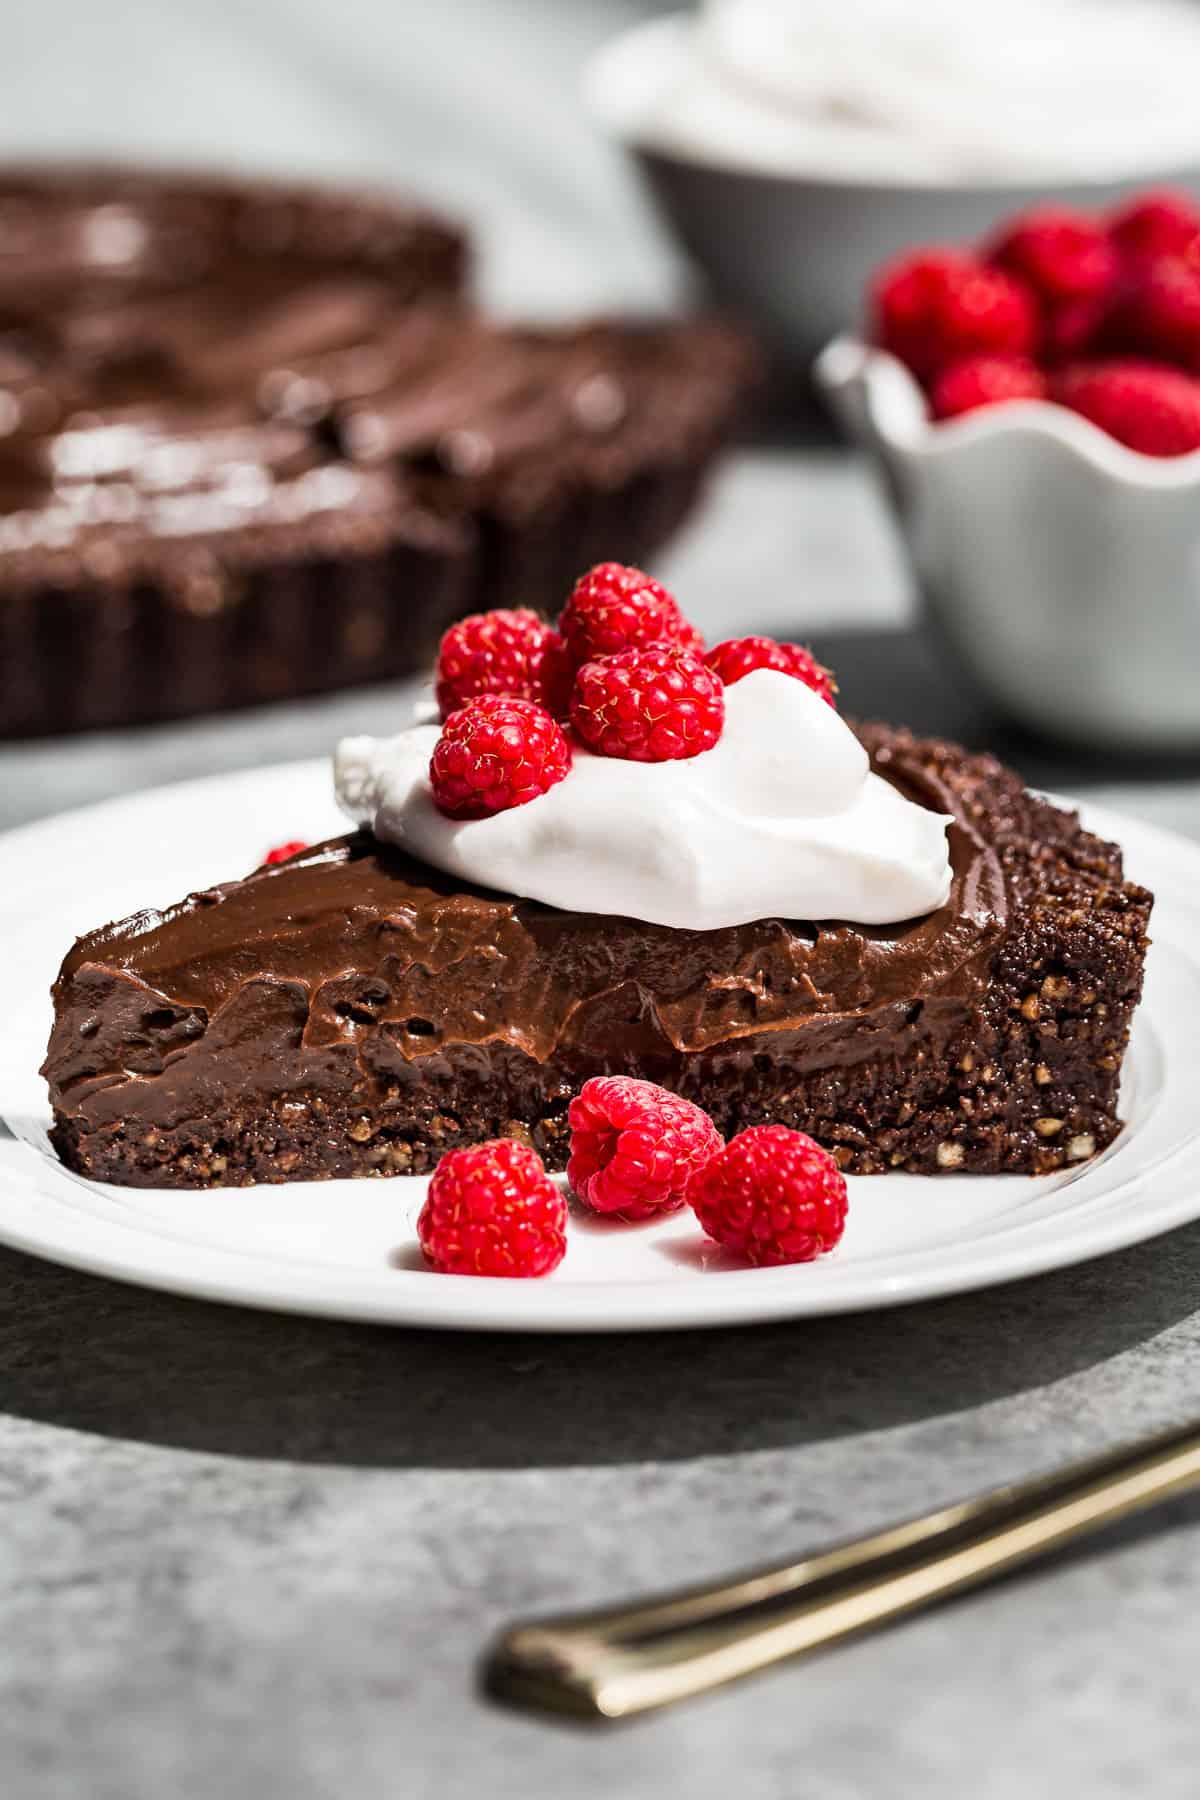 A side view of a slice of Chocolate Tart topped with whipped cream and raspberries.